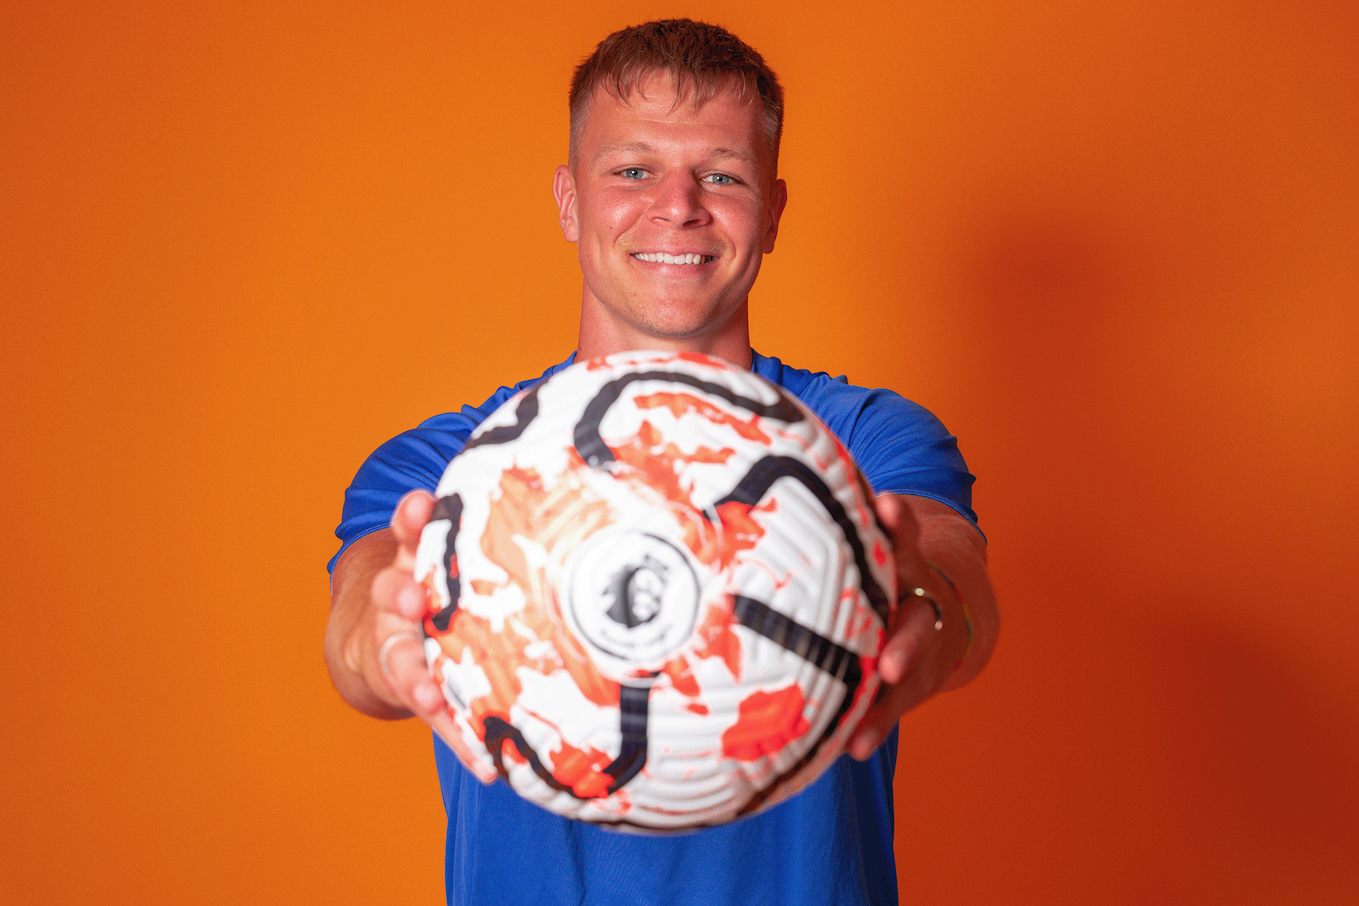 Mads Andersen holding a Premier League football.